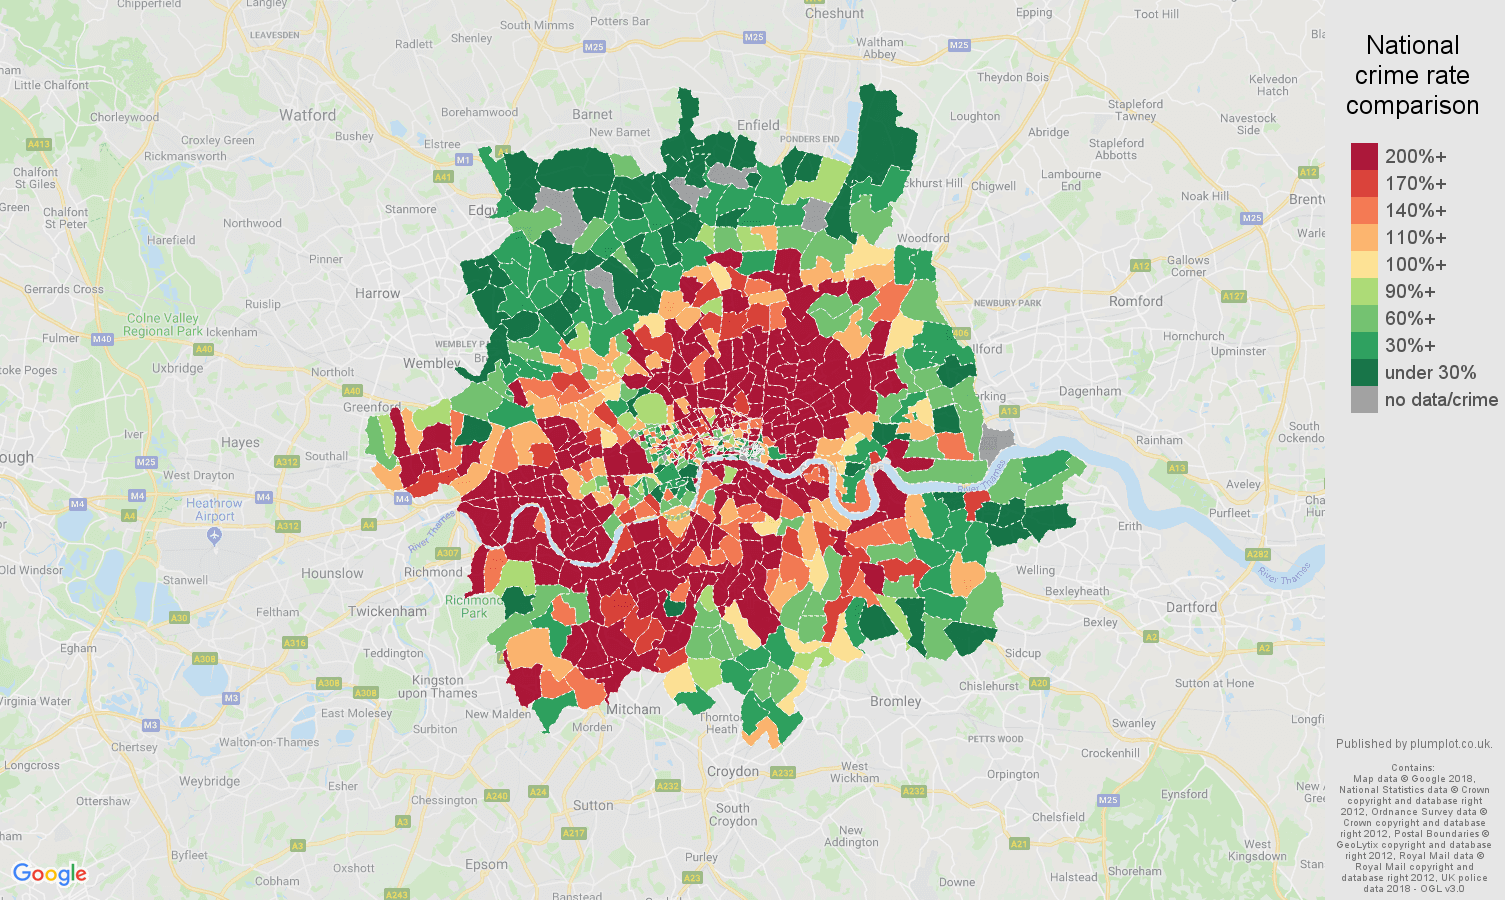 Inner London bicycle theft crime rate comparison map